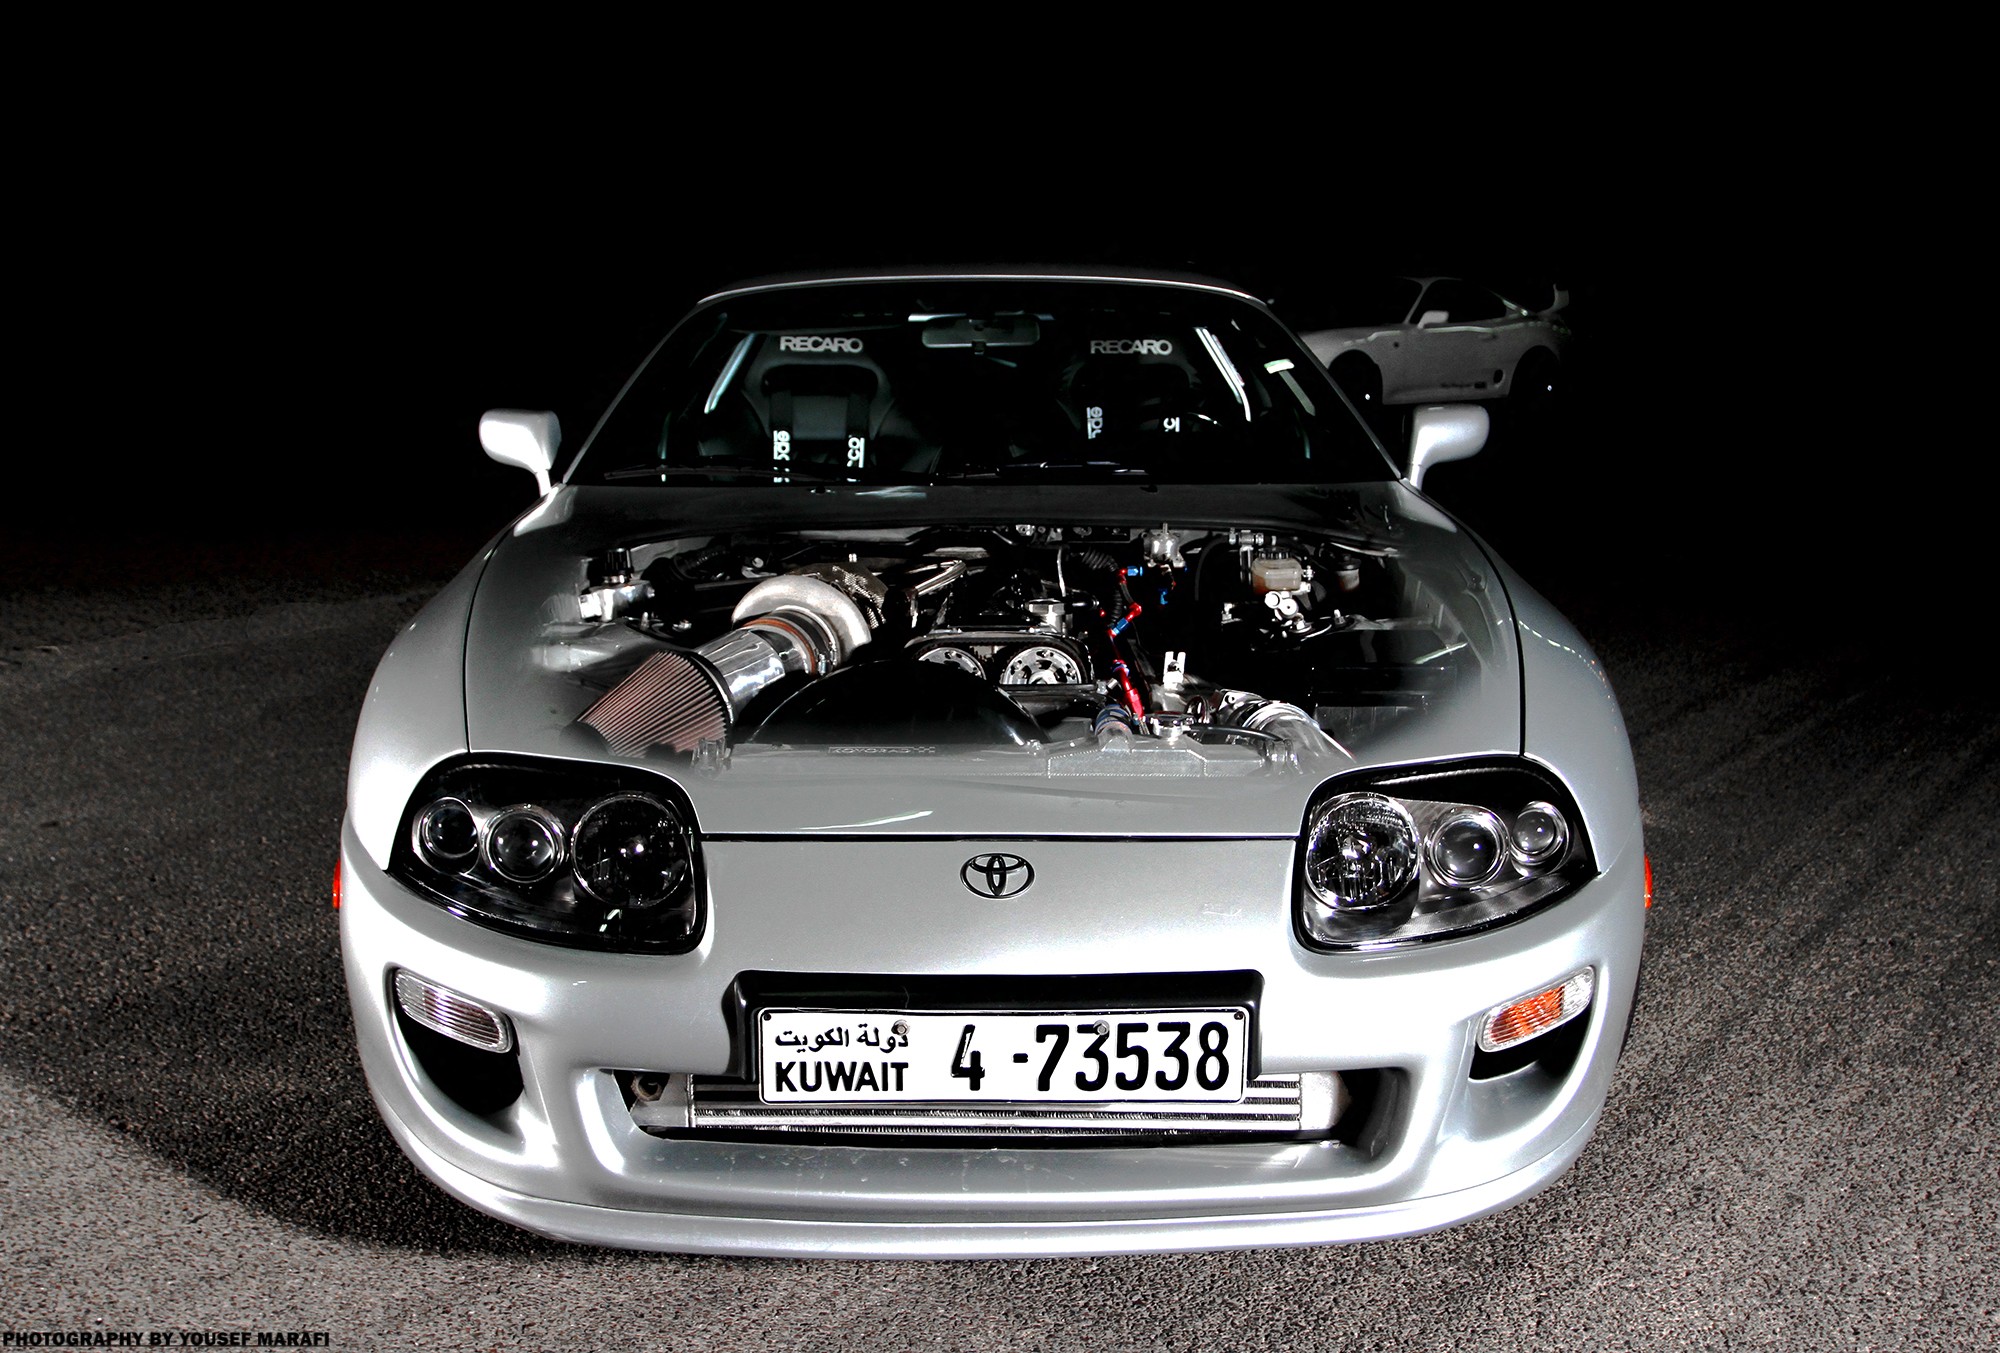 Toyota, Supra, Toyota Supra, Car Wallpapers HD / Desktop and Mobile Backgrounds